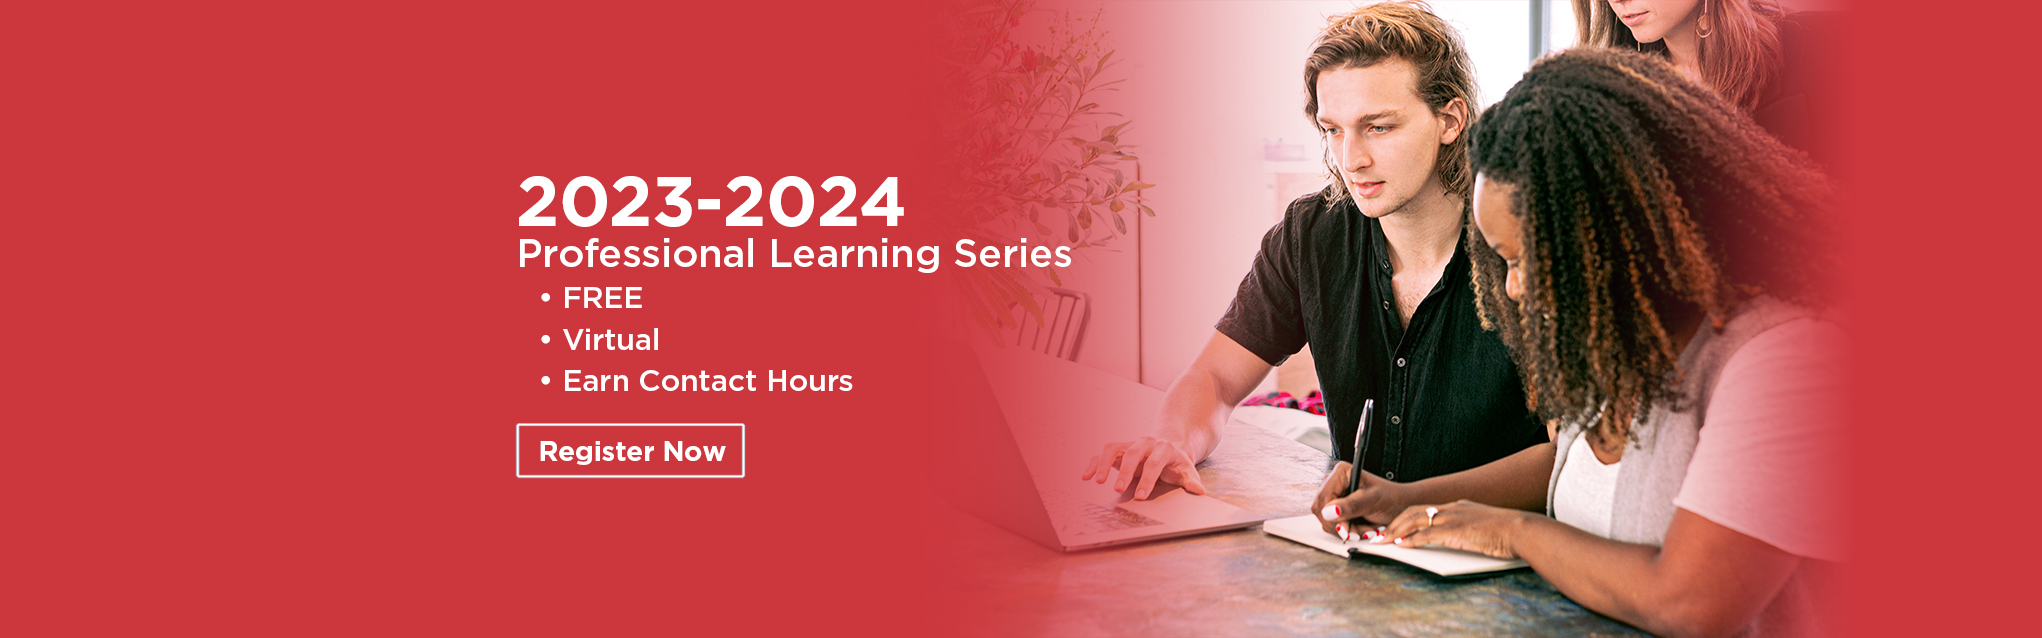 2023-2024 Professional Learning Series